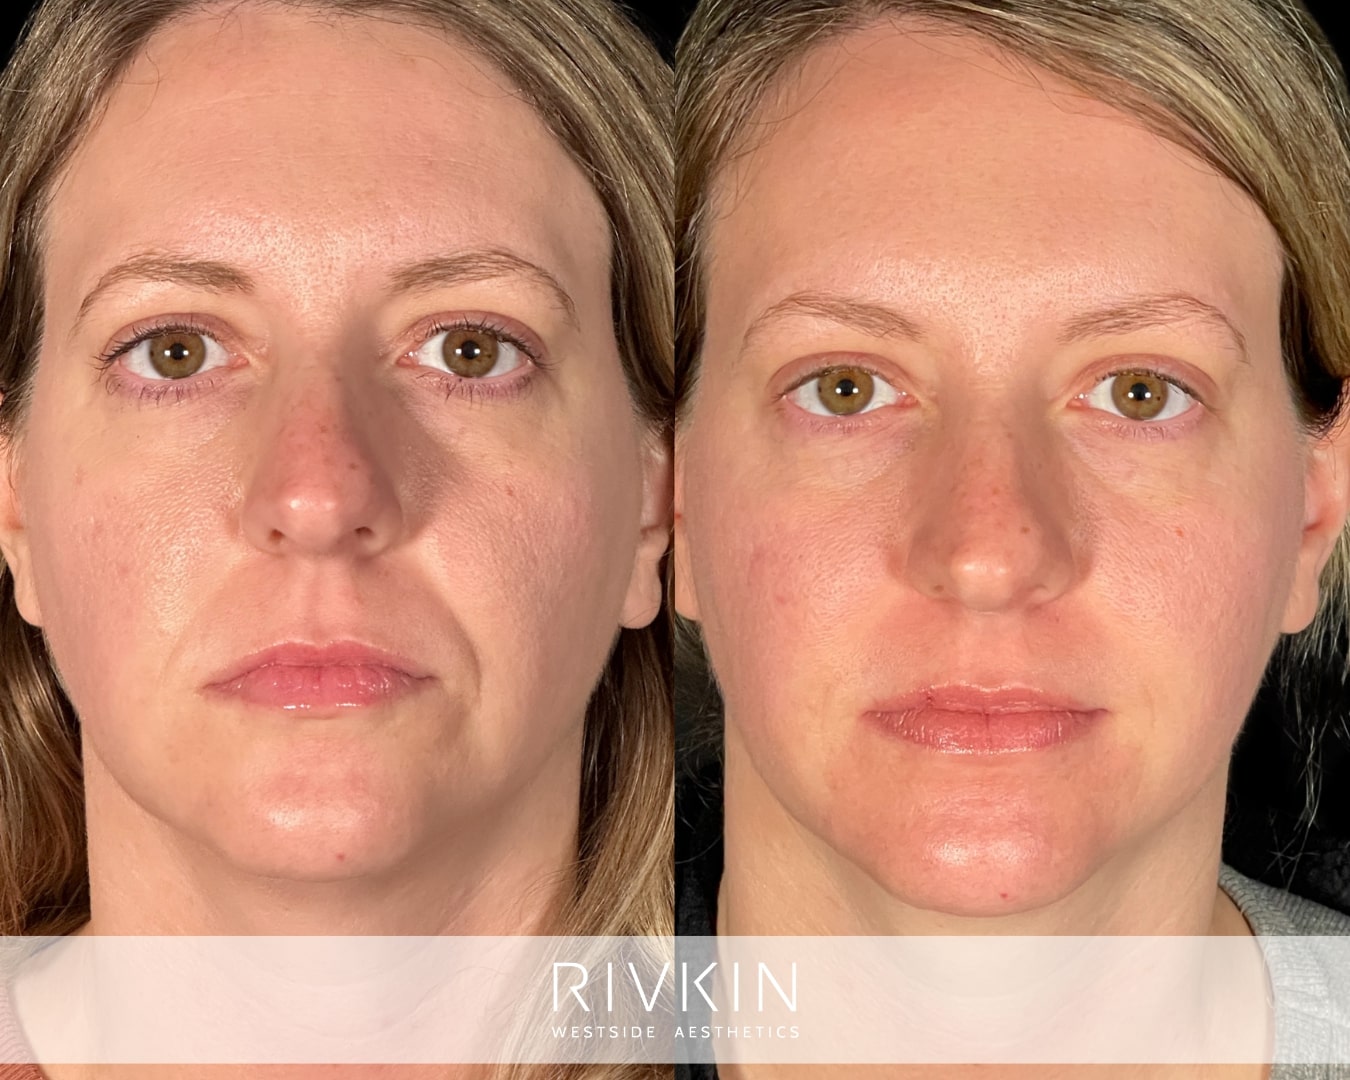 Before and after nasolabial fold filler on this patient in her 30s. Using injections of dermal filler deep lines are smoothed out, revealing a refreshed and youthful appearance.